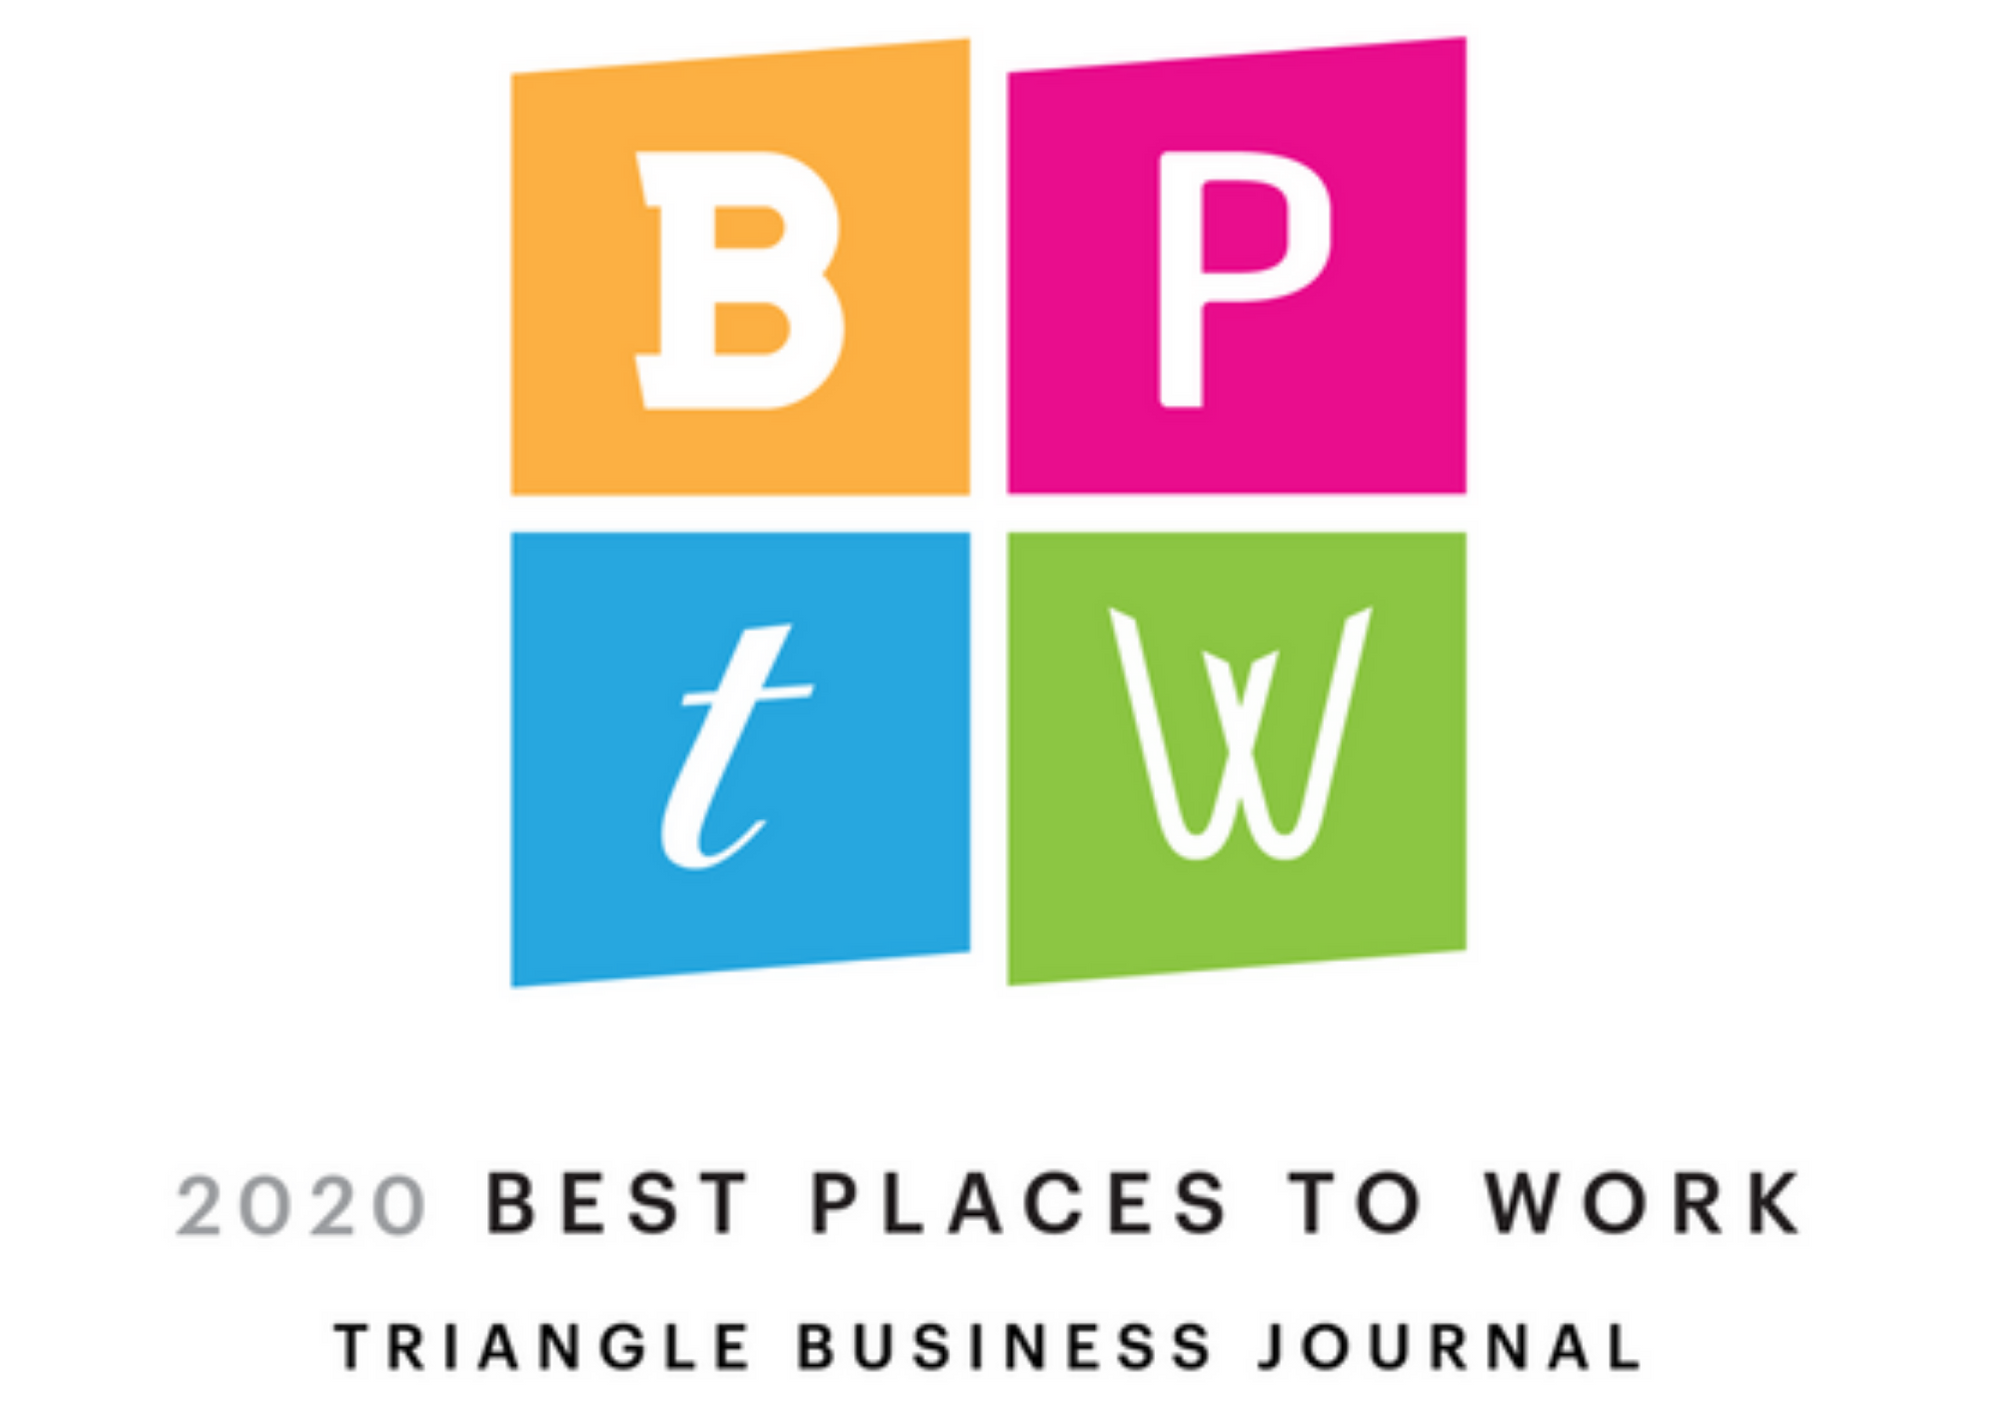 2020 Best Places to Work Awards